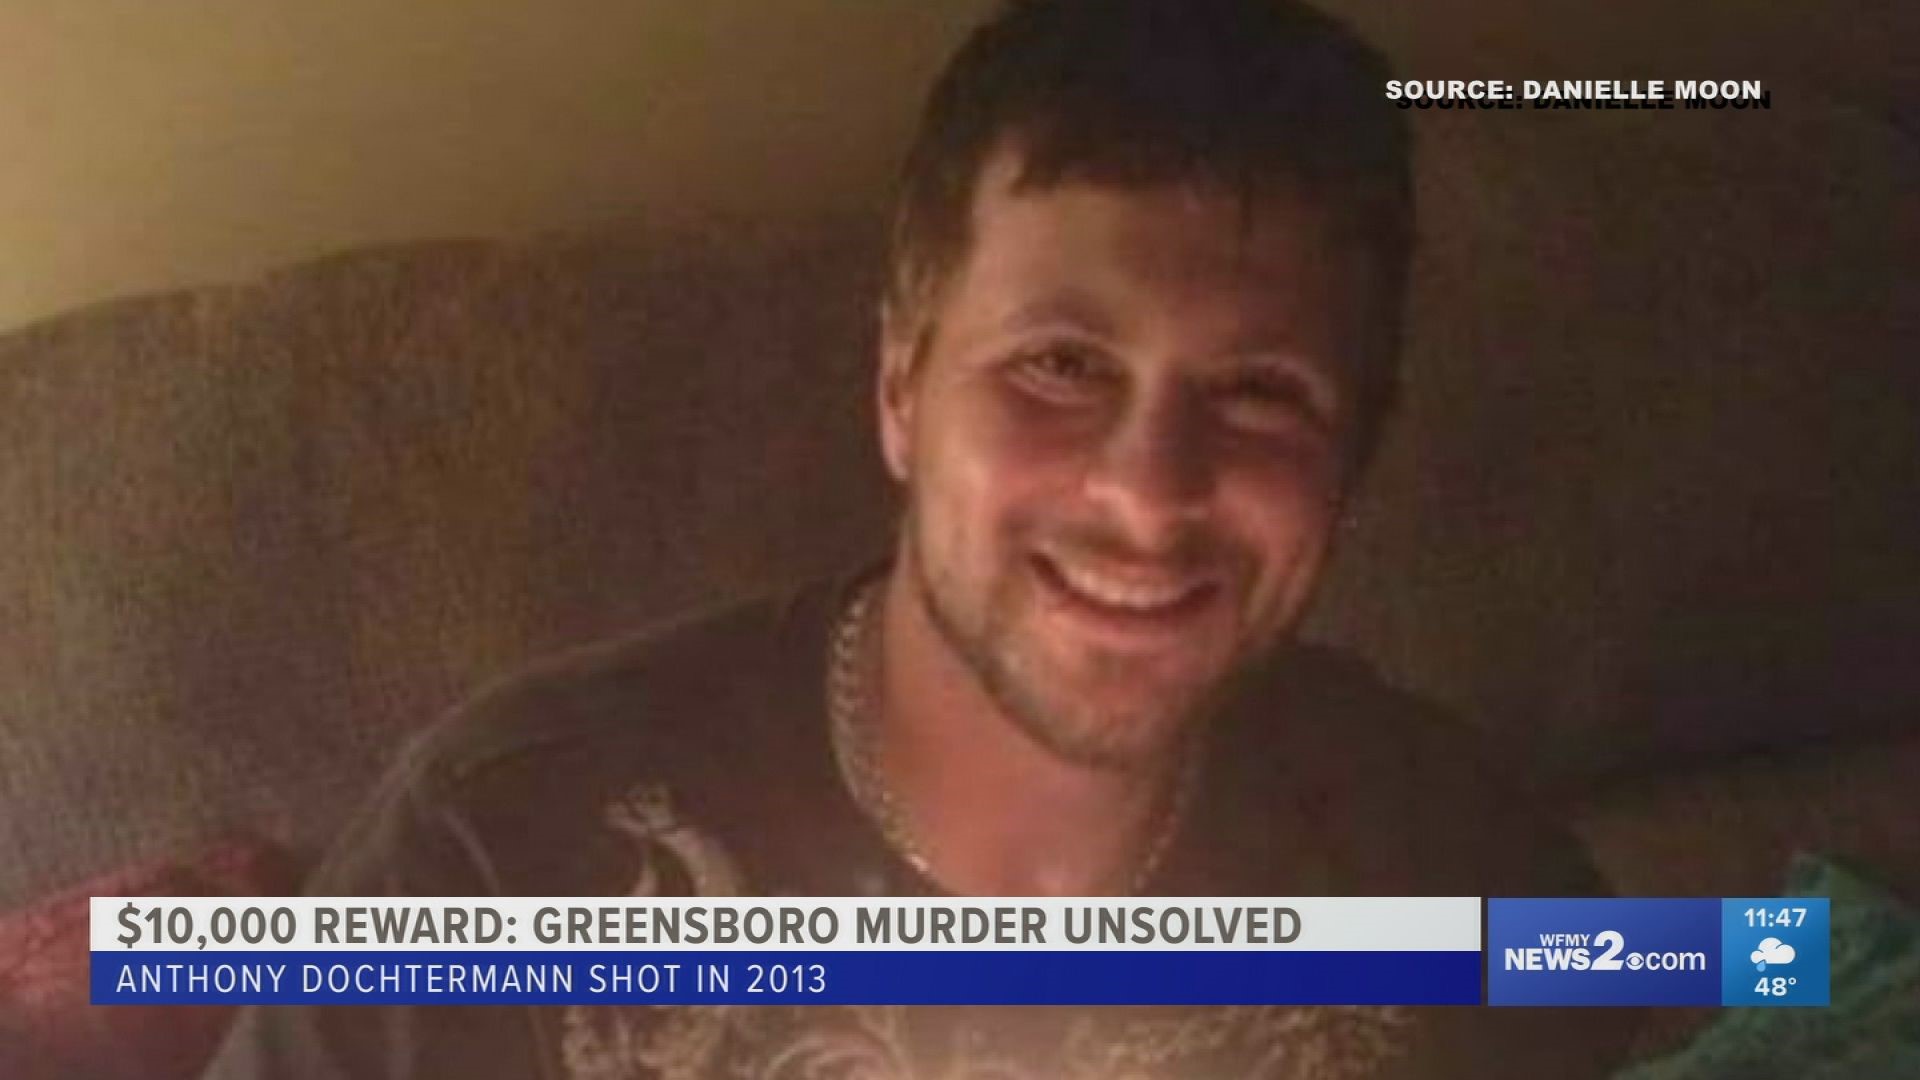 The family of a Greensboro man is renewing their search for his killer seven years after police say he died from a gunshot wound.